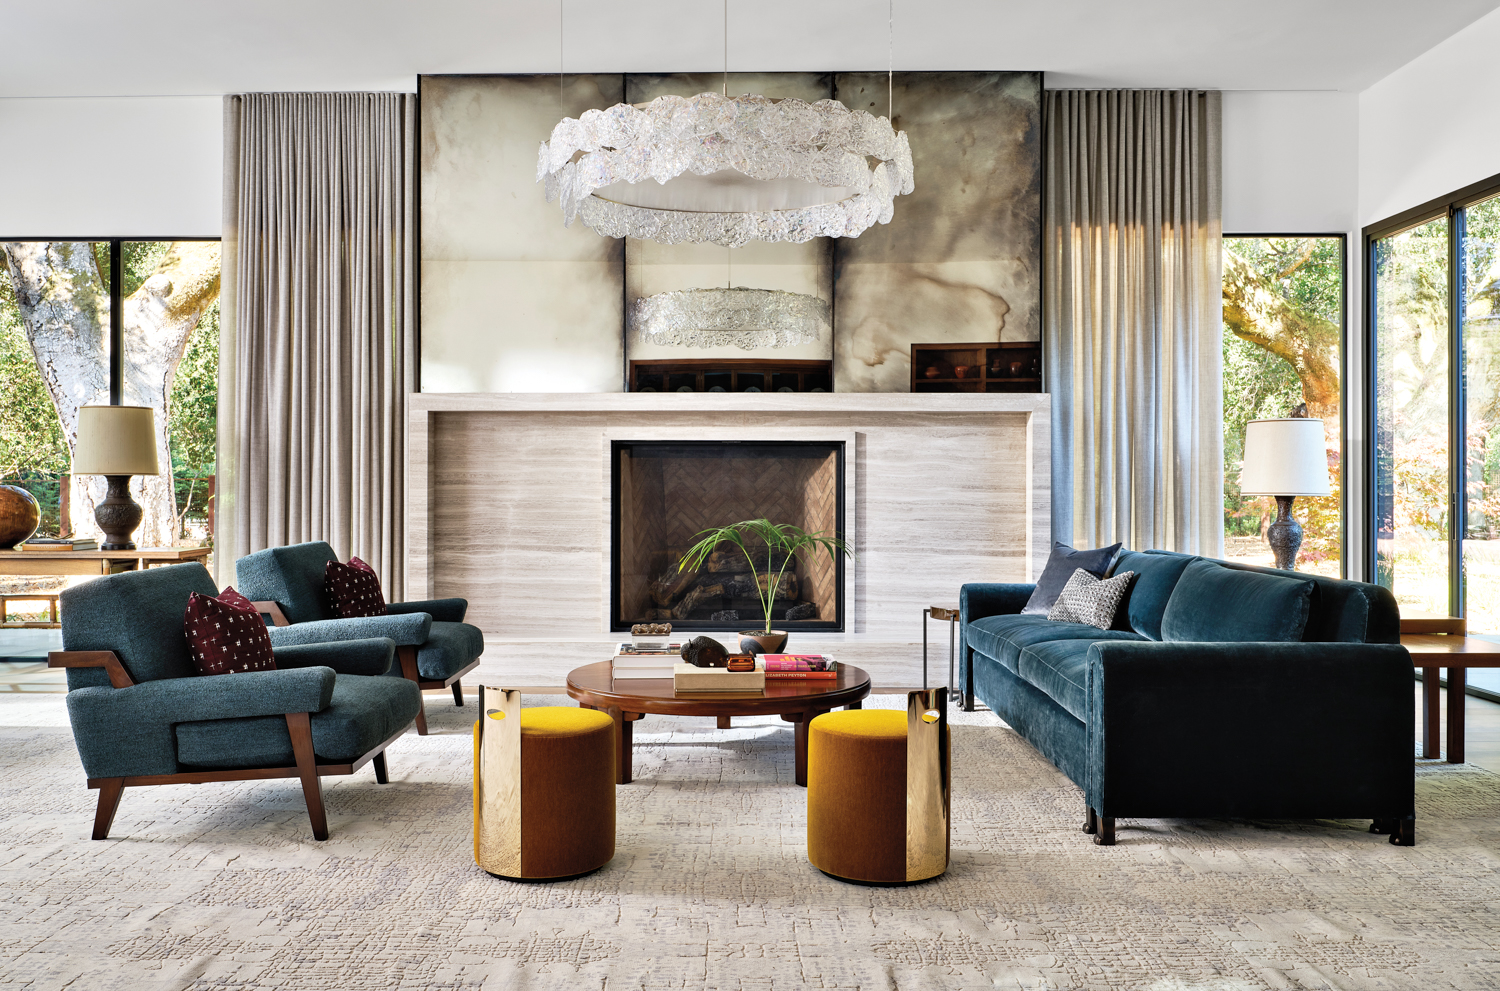 The interiors of this midcentury home have modern notes relating to the original style.